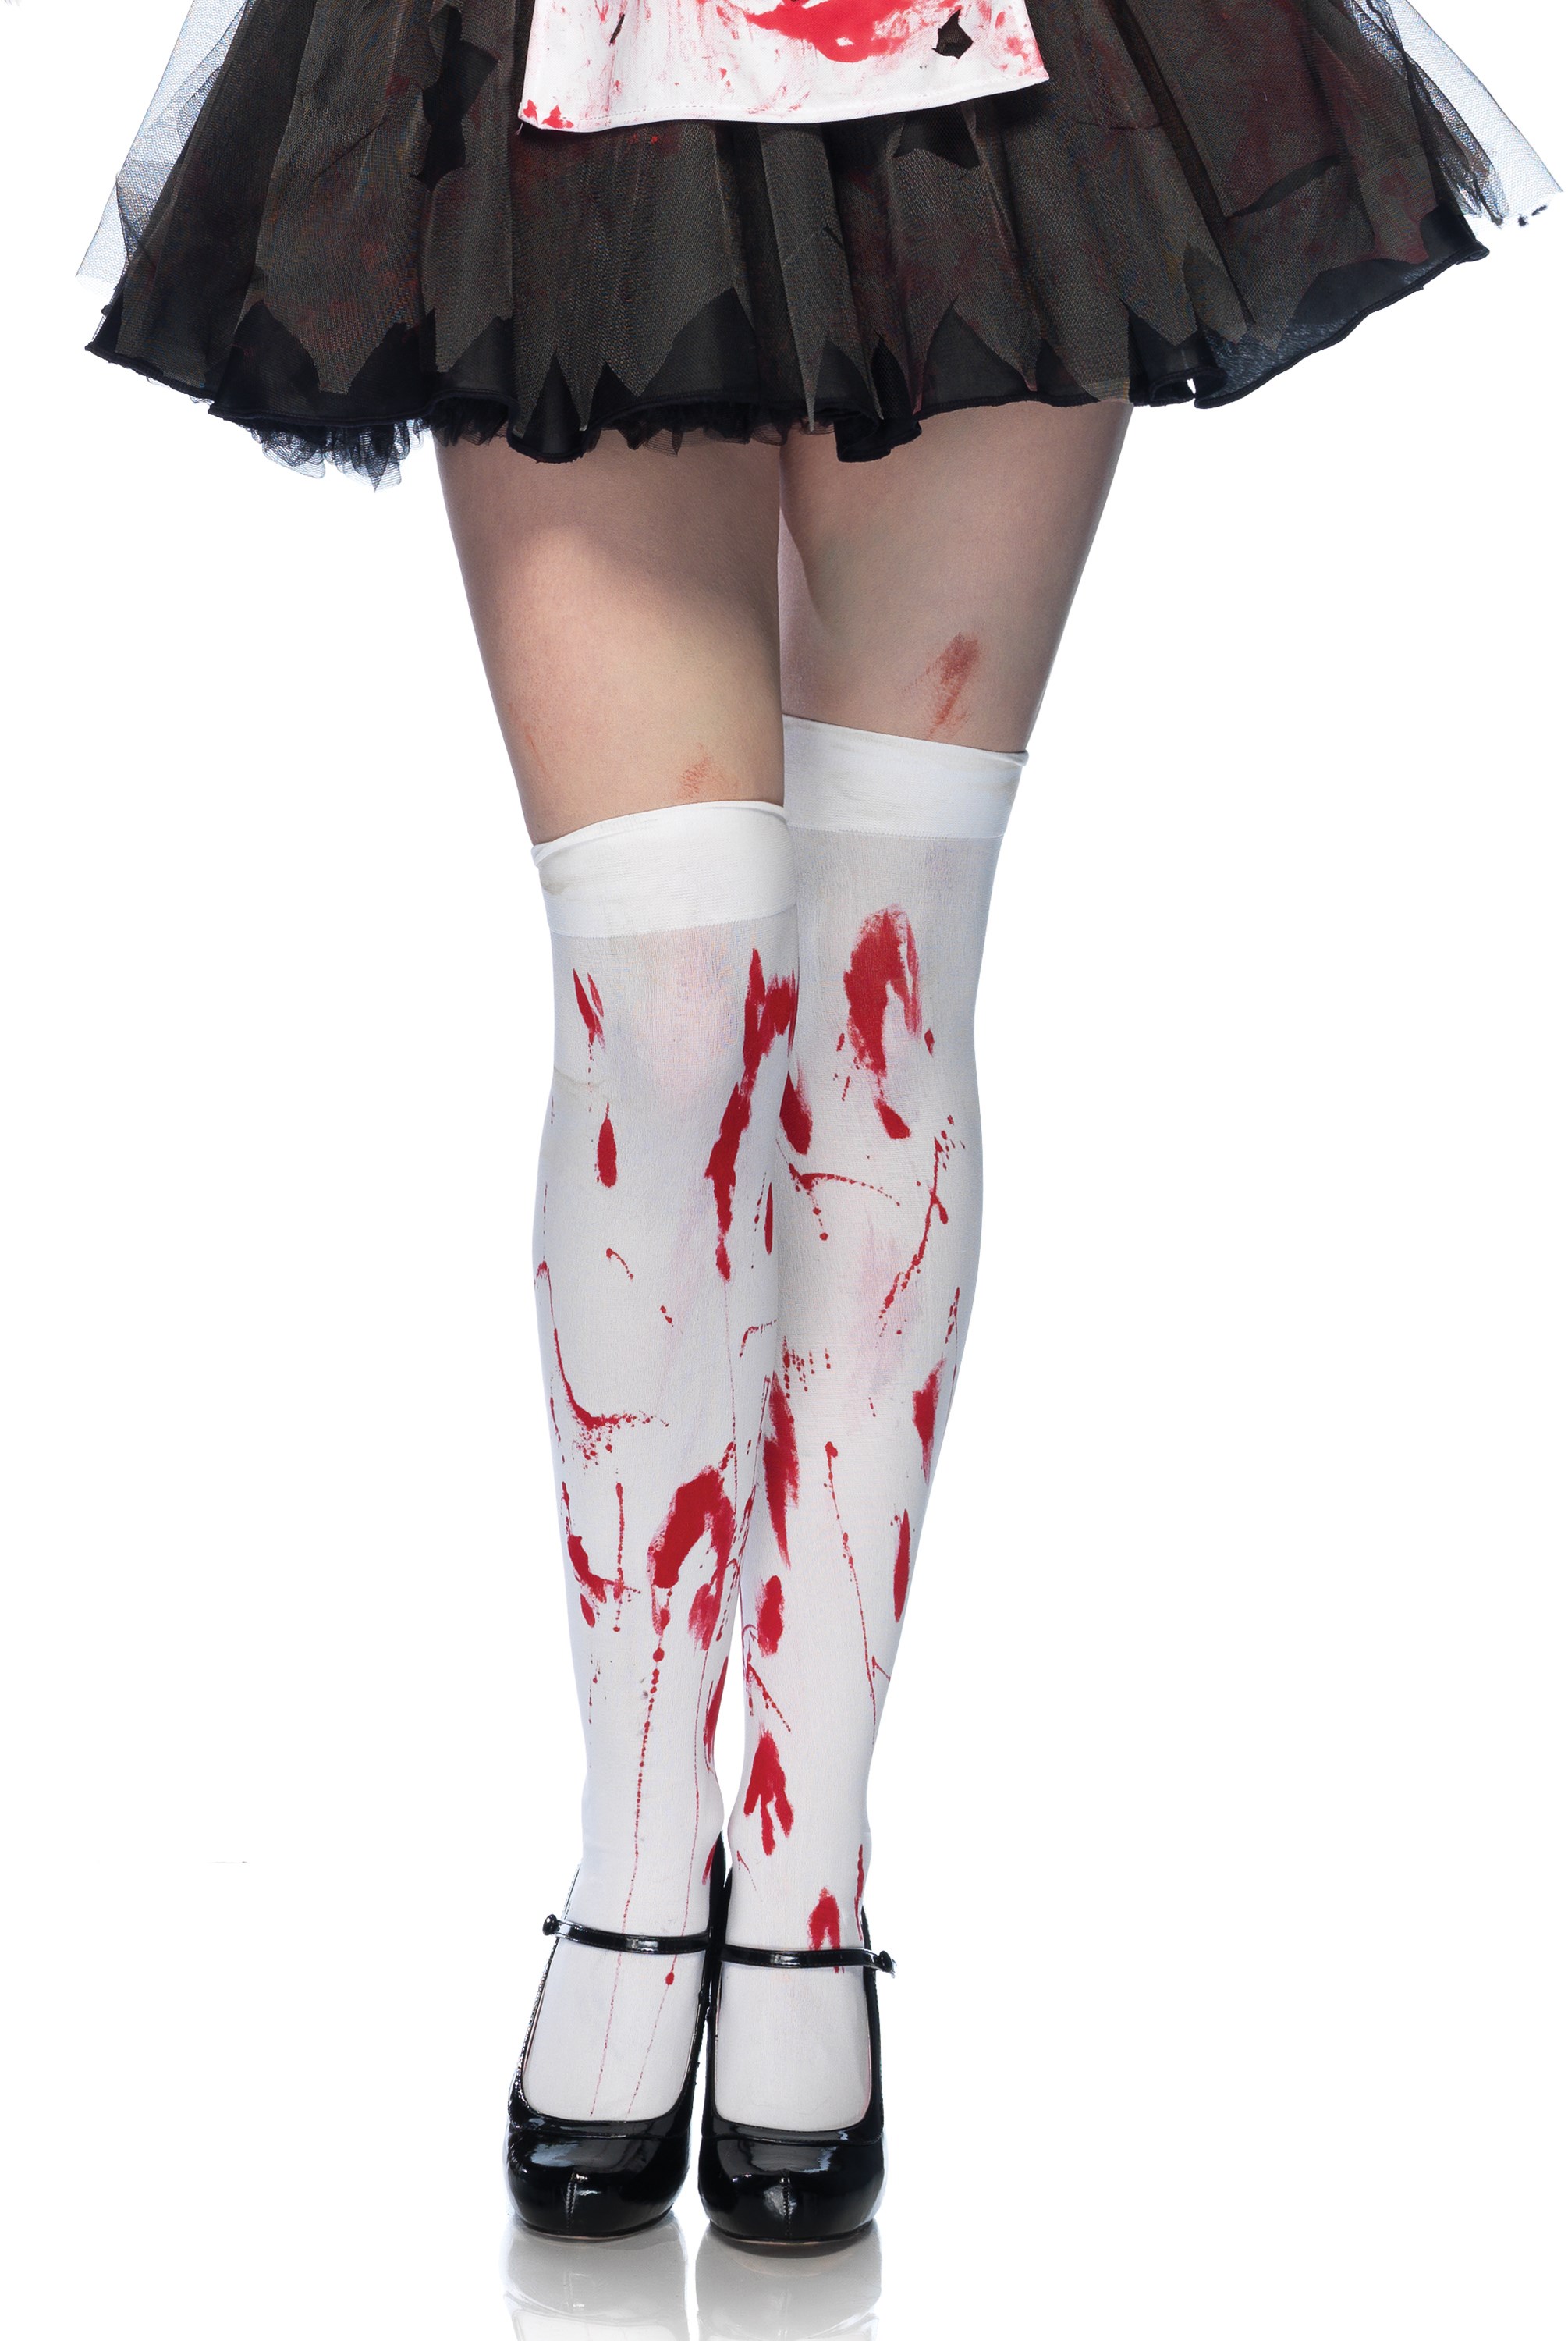 Bloody Zombie Thigh Highs Adult